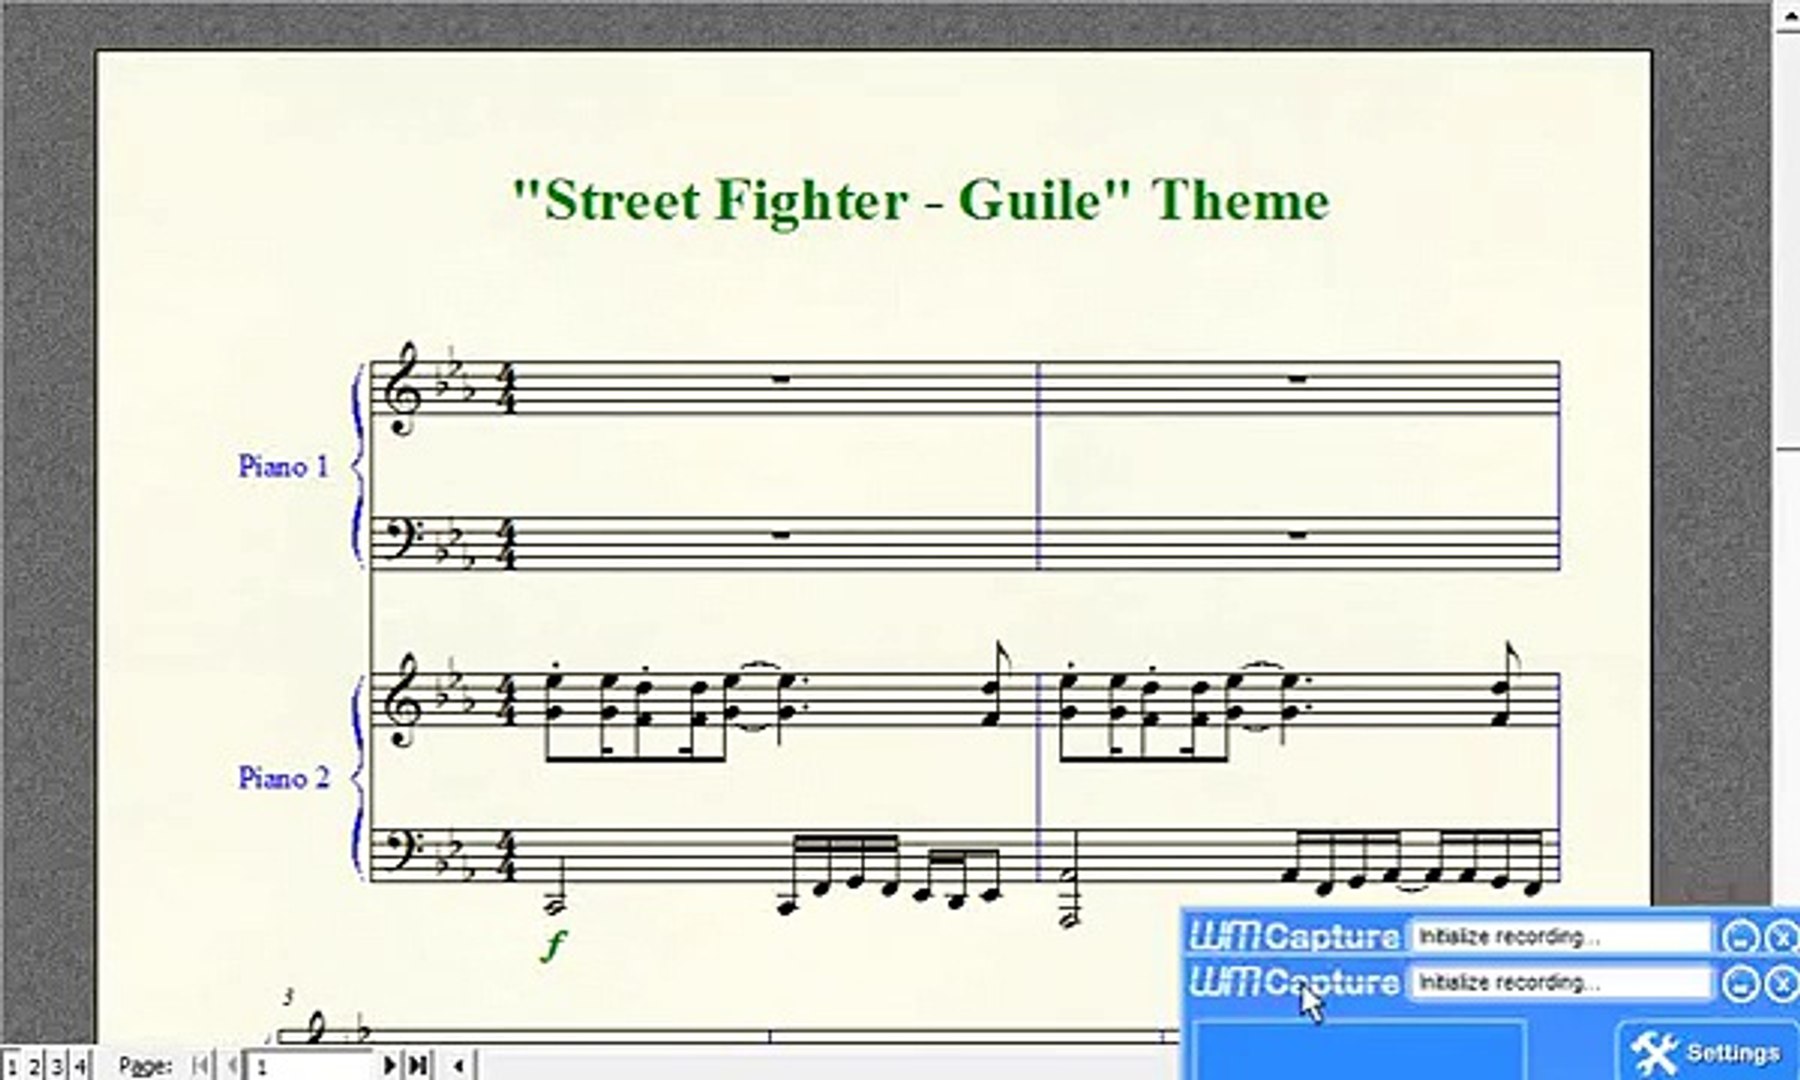 Piano Sheet Music - "Street Fighter 2 - Guile" Theme - Dailymotion Video